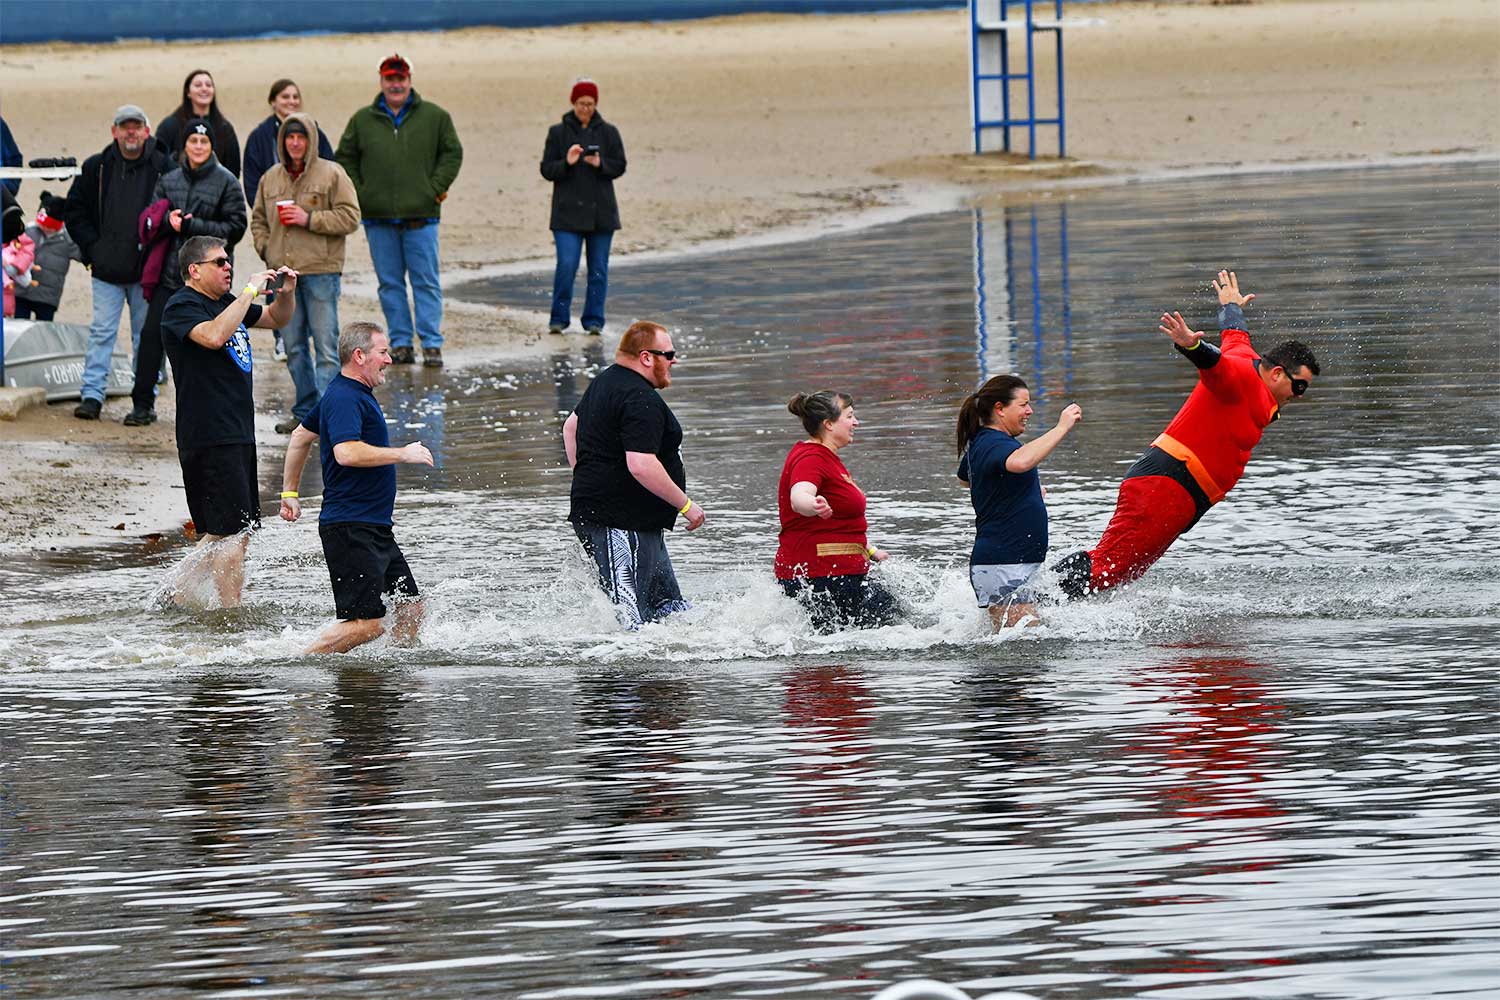 People splash into the water during the Polar Plunge.